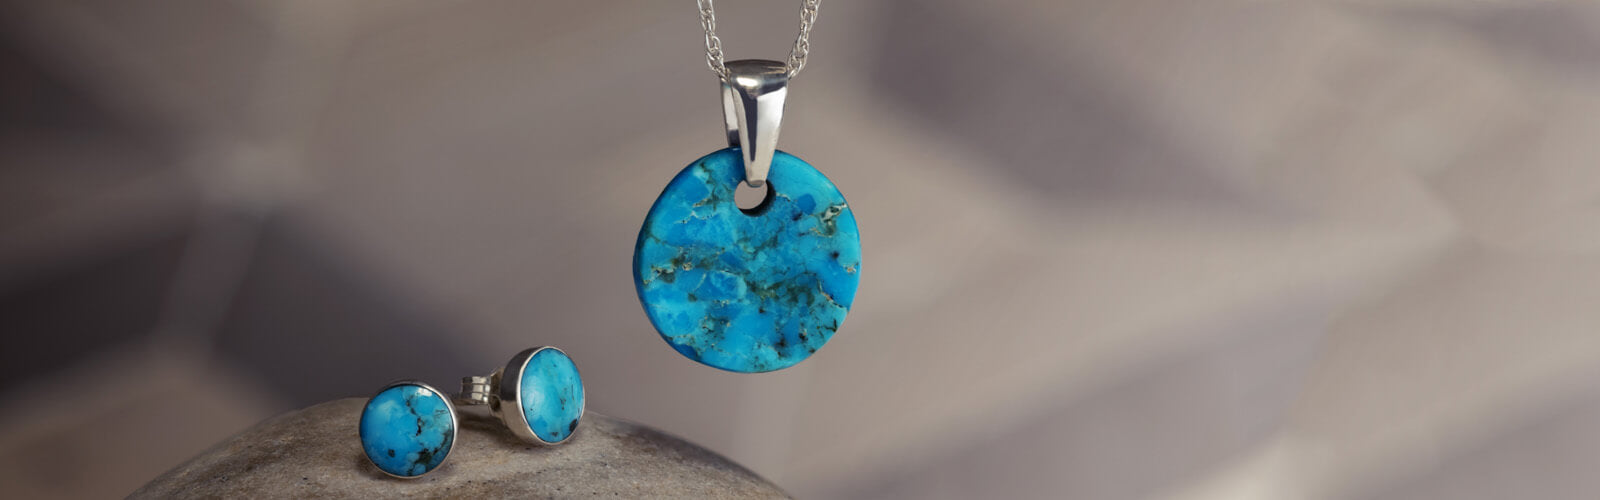 December Birthstone Jewelry Turquoise Pendant and Earrings